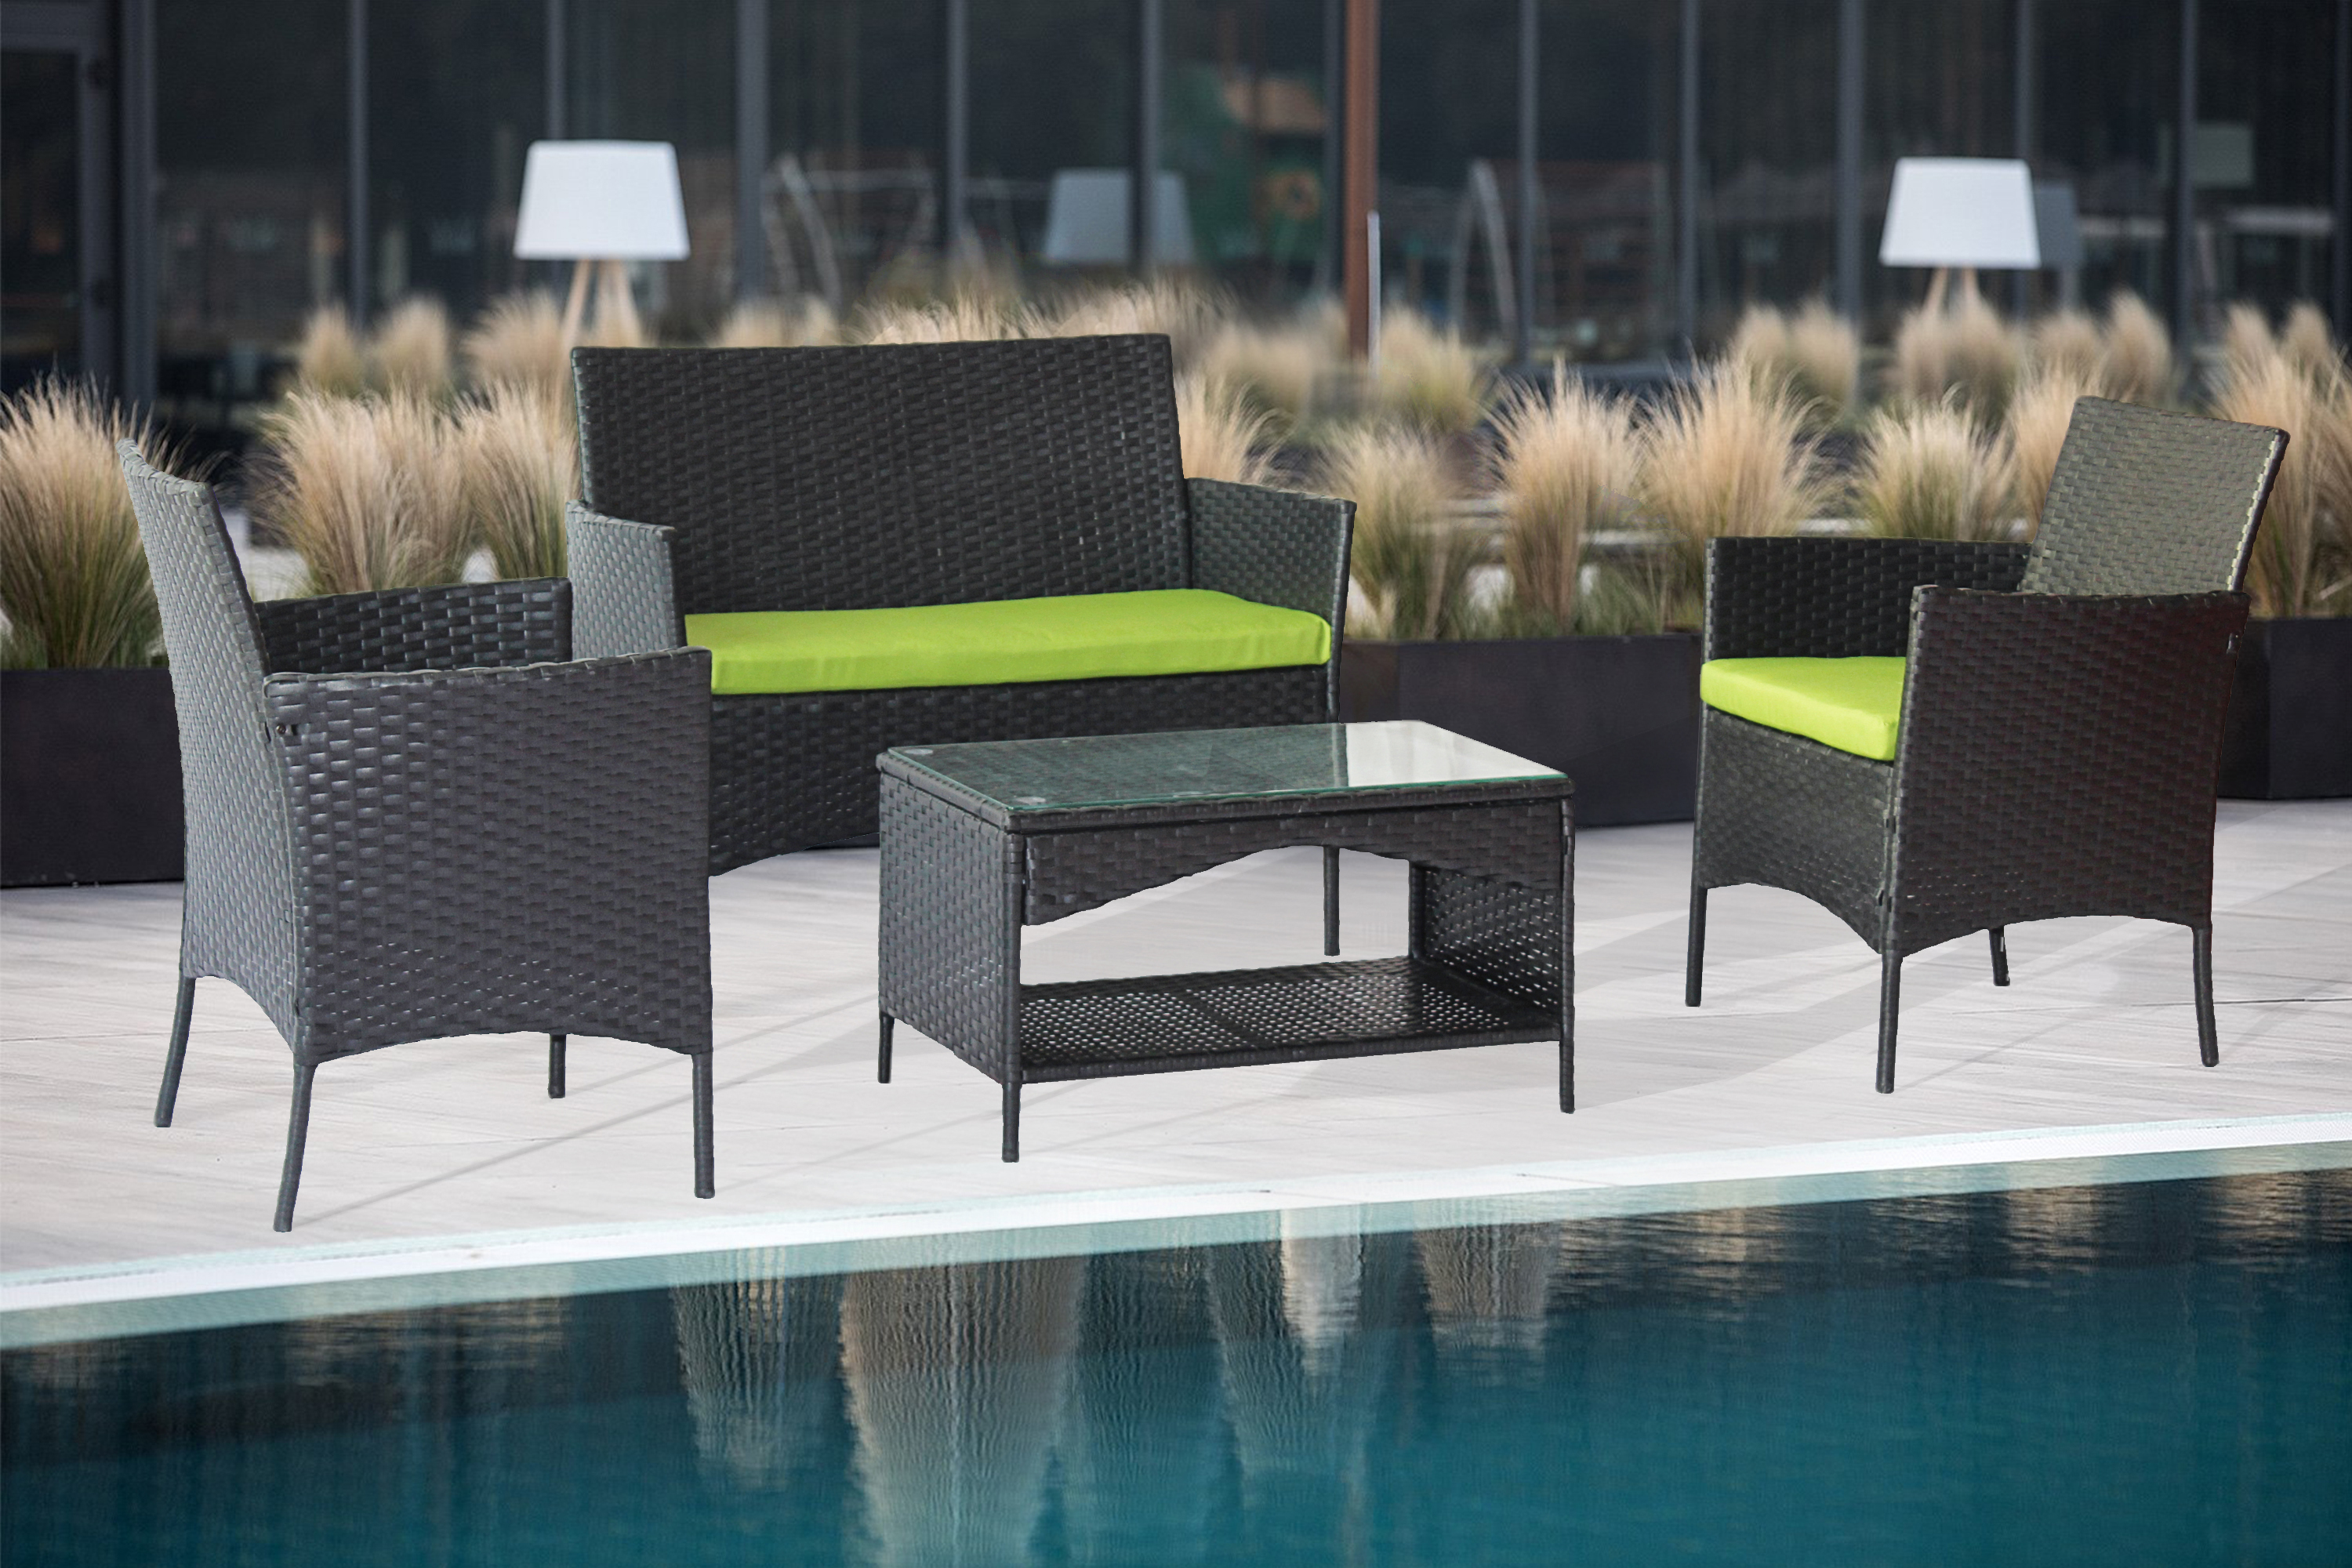 Outdoor Patio Set, iRerts Modern 4 Pieces Front Porch Furniture Sets, Rattan Wicker Patio Furniture Set with Green Cushion, Table, Patio Conversation Sets for Backyard Garden Poolside, Black, R2389 - image 5 of 8